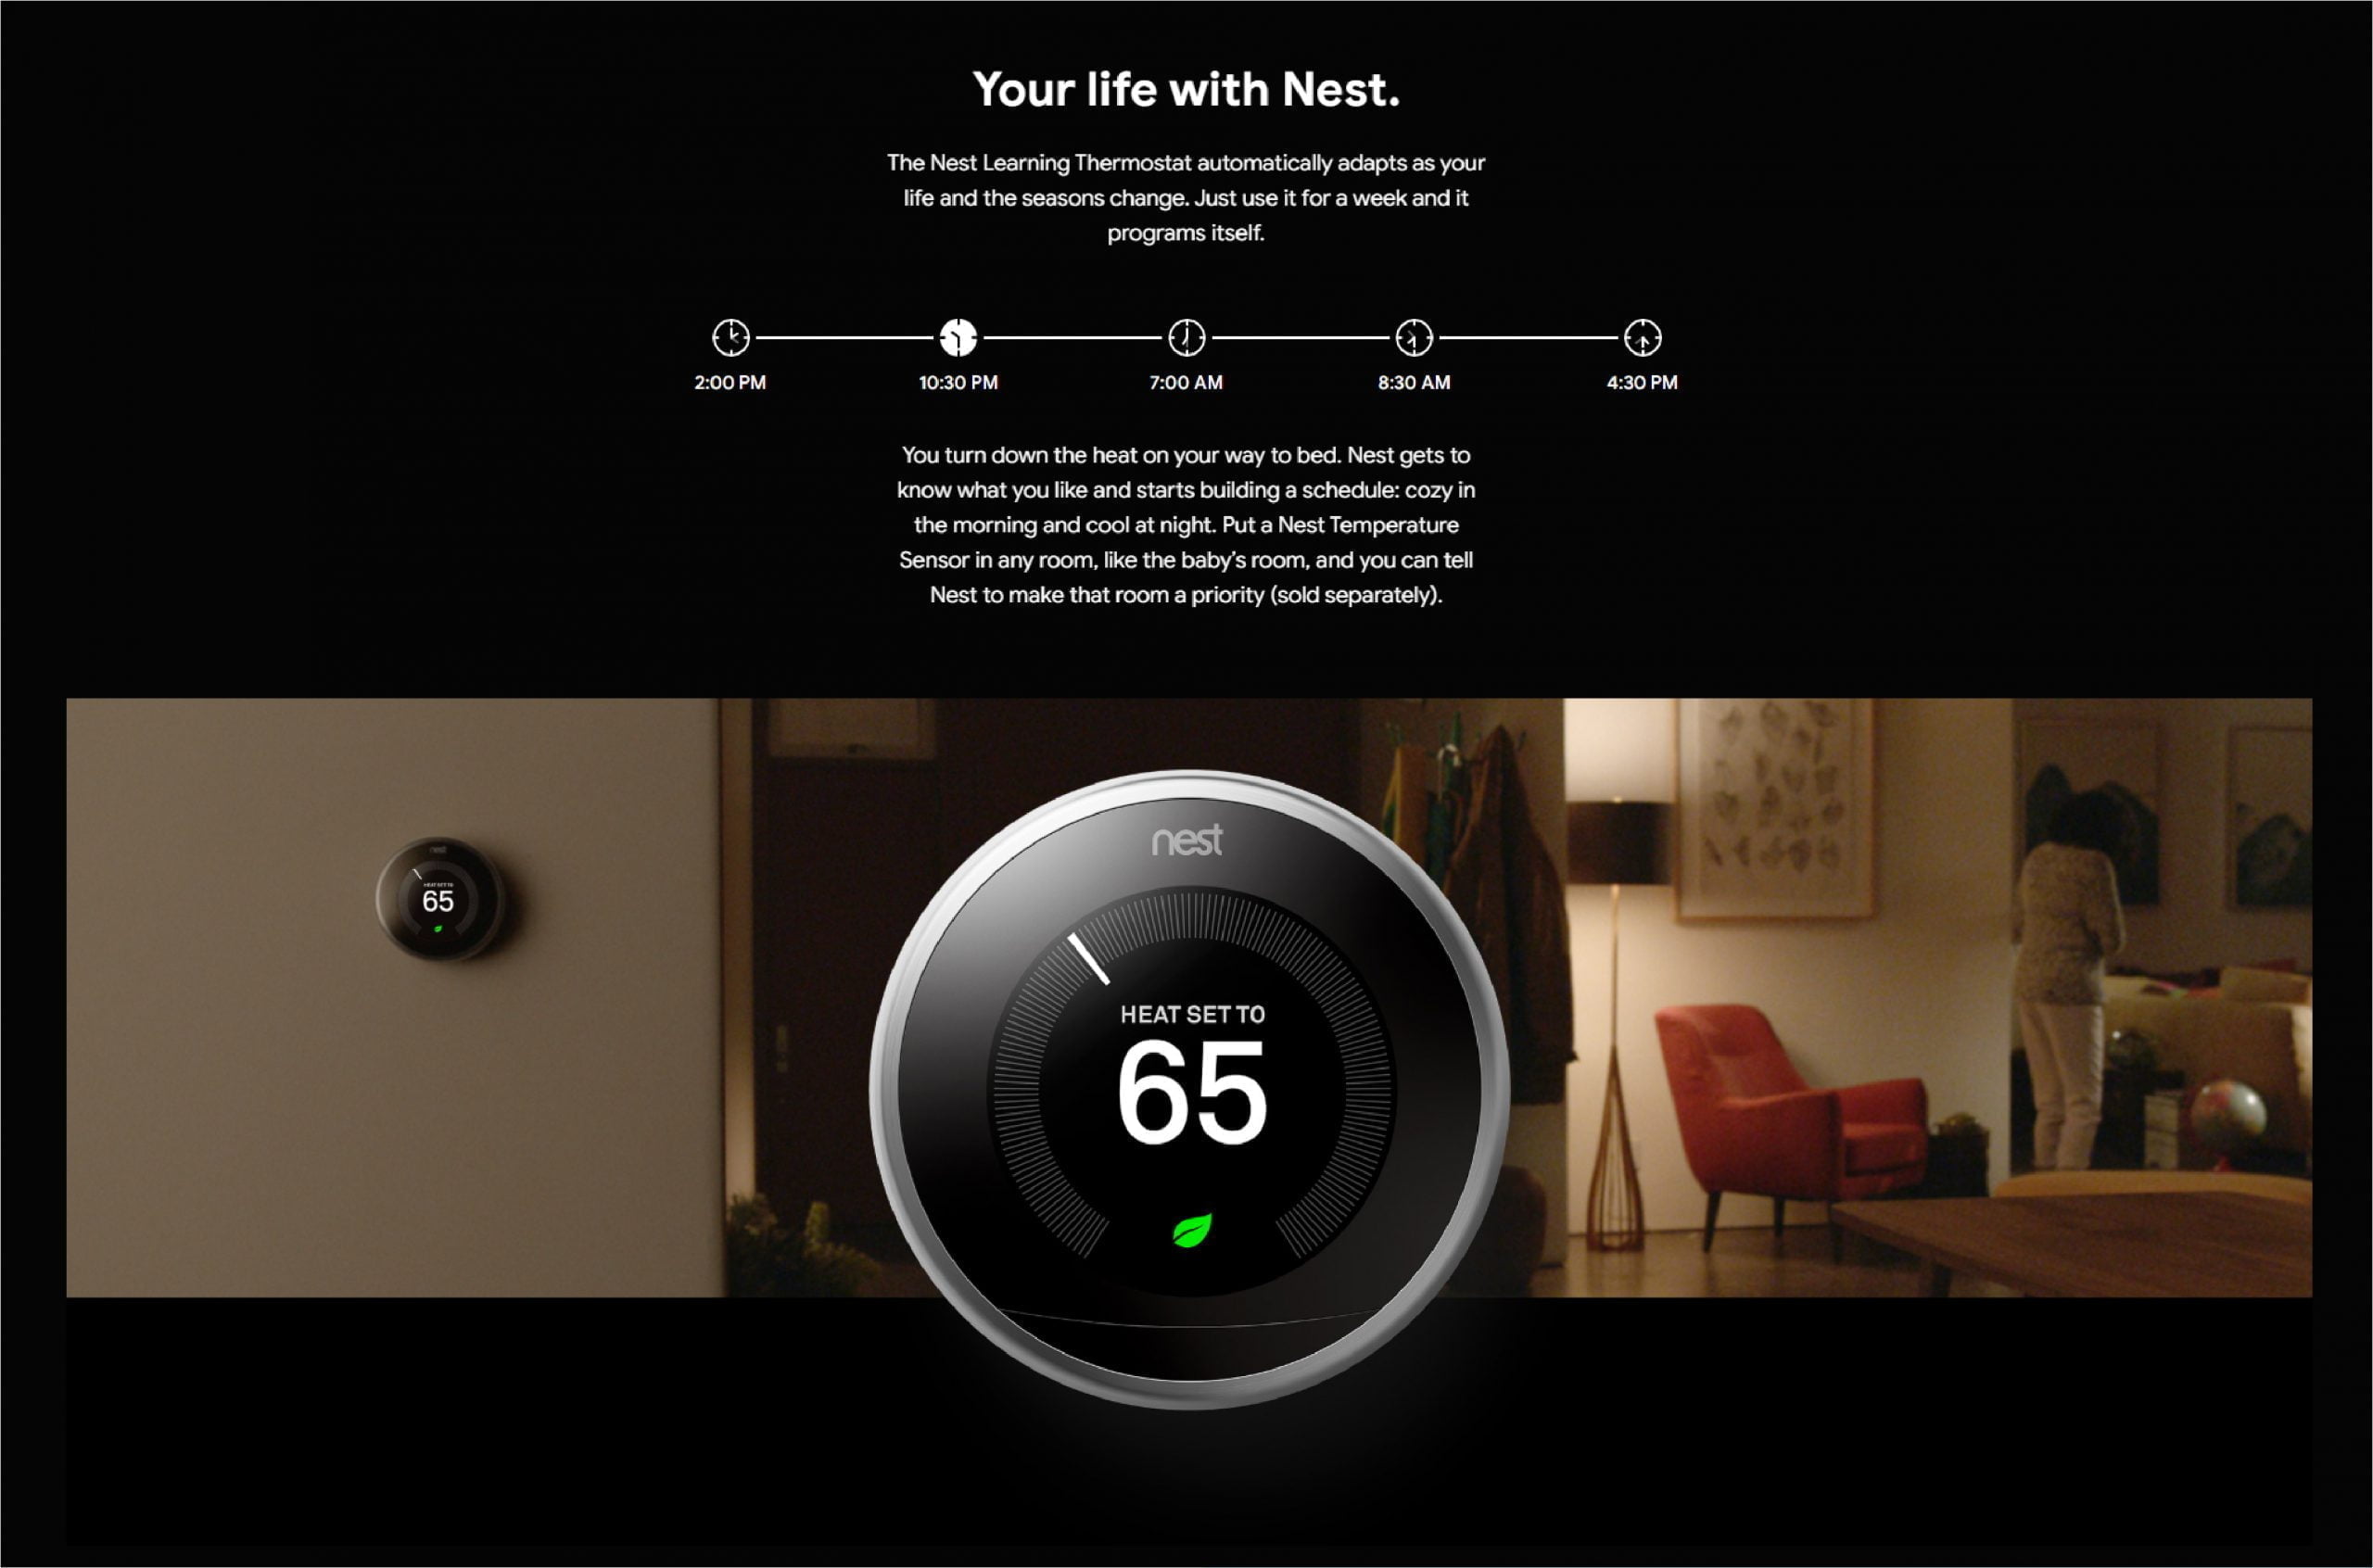 Nest 03 Scaled Google &Lt;H1&Gt;Google Nest Learning Smart Wifi Thermostat 3Rd Gen - T3017Us White&Lt;/H1&Gt; &Lt;Ul Class=&Quot;A-Unordered-List A-Vertical A-Spacing-Mini&Quot;&Gt; &Lt;Li&Gt;&Lt;Span Class=&Quot;A-List-Item&Quot;&Gt;Auto-Schedule: No More Confusing Programming. It Learns The Temperatures You Like And Programs Itself.&Lt;/Span&Gt;&Lt;/Li&Gt; &Lt;Li&Gt;&Lt;Span Class=&Quot;A-List-Item&Quot;&Gt;Wi-Fi Thermostat: Connect The Nest Thermostat To Wi-Fi To Change The Temperature From Your Phone, Tablet Or Laptop.&Lt;/Span&Gt;&Lt;/Li&Gt; &Lt;Li&Gt;&Lt;Span Class=&Quot;A-List-Item&Quot;&Gt;Energy Saving: You’ll See The Nest Leaf When You Choose A Temperature That Saves Energy. It Guides You In The Right Direction.&Lt;/Span&Gt;&Lt;/Li&Gt; &Lt;Li&Gt;&Lt;Span Class=&Quot;A-List-Item&Quot;&Gt;Smart Thermostat: Early-On Nest Learns How Your Home Warms Up And Keeps An Eye On The Weather To Get You The Temperature You Want When You Want It.&Lt;/Span&Gt;&Lt;/Li&Gt; &Lt;Li&Gt;&Lt;Span Class=&Quot;A-List-Item&Quot;&Gt;Home/Away Assist: The Nest Thermostat Automatically Turns Itself Down When You’re Away To Avoid Heating Or Cooling An Empty Home.&Lt;/Span&Gt;&Lt;/Li&Gt; &Lt;Li&Gt;&Lt;Span Class=&Quot;A-List-Item&Quot;&Gt;Works With Amazon Alexa For Voice Control (Alexa Device Sold Separately)&Lt;/Span&Gt;&Lt;/Li&Gt; &Lt;Li&Gt;&Lt;Span Class=&Quot;A-List-Item&Quot;&Gt;Auto-Schedule: Nest Learns The Temperatures You Like And Programs Itself In About A Week.&Lt;/Span&Gt;&Lt;/Li&Gt; &Lt;/Ul&Gt; &Lt;H5&Gt;Note : Direct Replacement Warranty One Year&Lt;/H5&Gt; &Lt;Div Class=&Quot;Html-Fragment&Quot;&Gt; &Lt;Div&Gt; &Lt;B&Gt;We Also Provide International Wholesale And Retail Shipping To All Gcc Countries: Saudi Arabia, Qatar, Oman, Kuwait, Bahrain.&Lt;/B&Gt; &Lt;/Div&Gt; &Lt;/Div&Gt; &Lt;Div Class=&Quot;A-Row A-Expander-Container A-Expander-Inline-Container&Quot; Aria-Live=&Quot;Polite&Quot;&Gt; &Lt;Div Class=&Quot;A-Expander-Content A-Expander-Extend-Content A-Expander-Content-Expanded&Quot; Aria-Expanded=&Quot;True&Quot;&Gt;&Lt;/Div&Gt; &Lt;/Div&Gt; Thermostat Google Nest Learning Smart Wifi Thermostat 3Rd Gen - T3017Us White